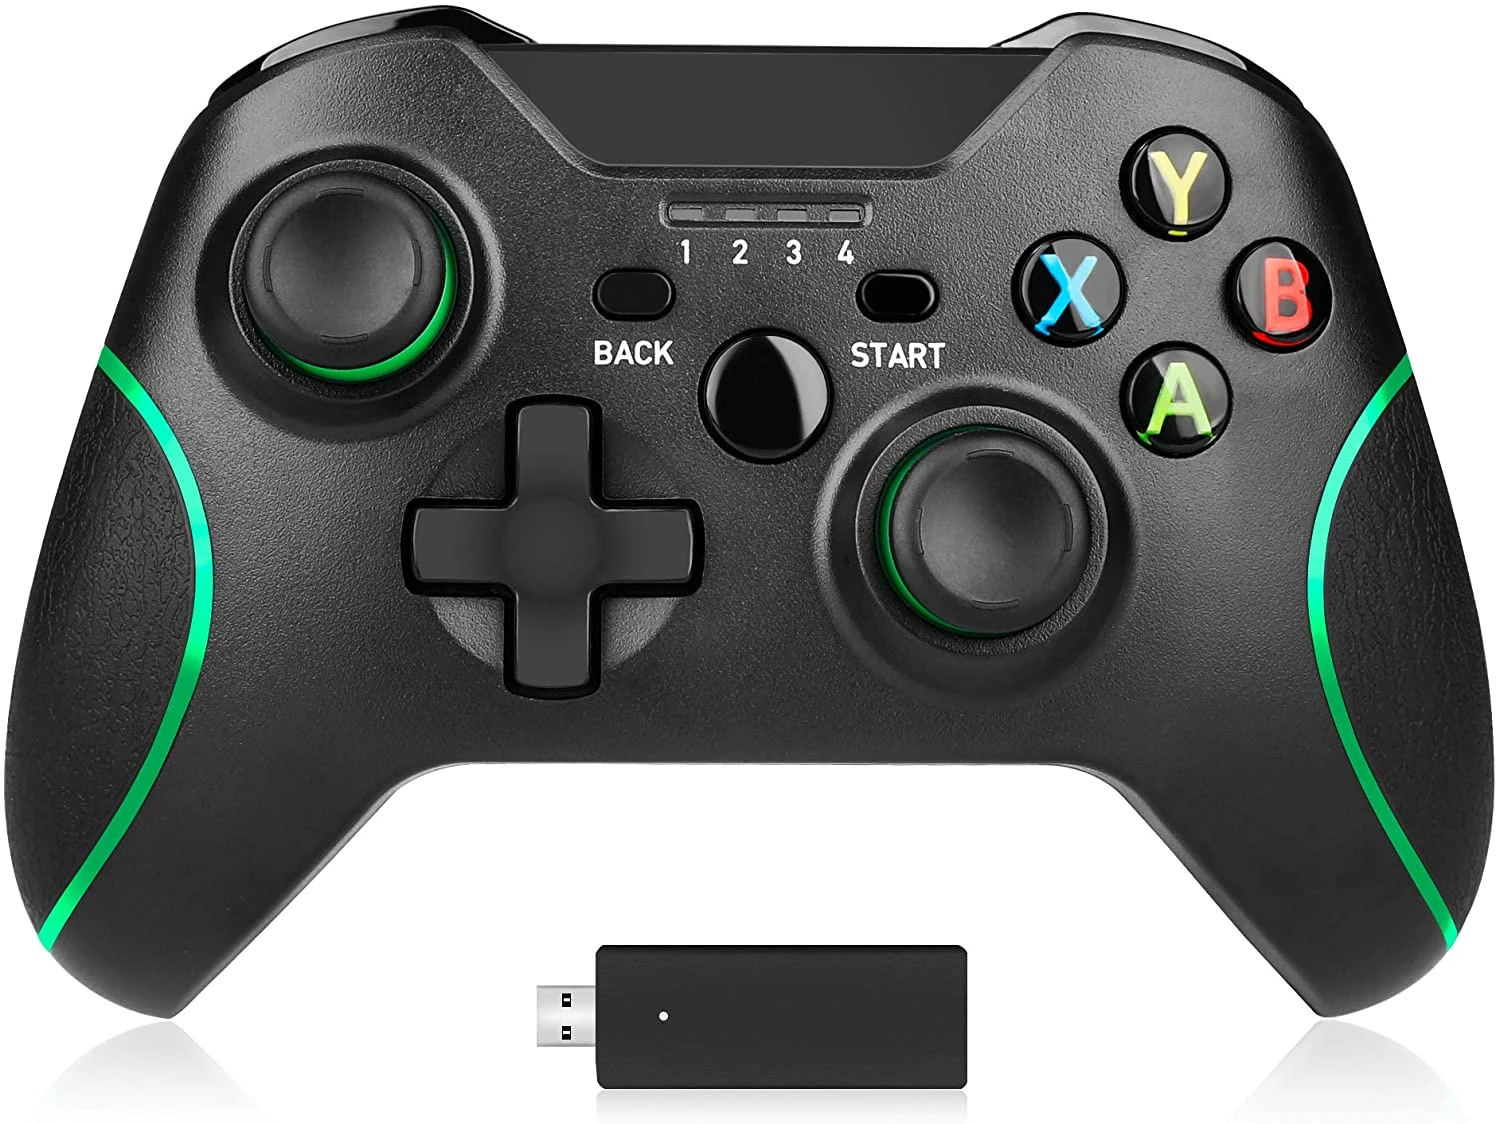 

Wireless Controller 2.4GHZ Game Controller with Receiver for Xbox One/X/S/ PS3/ PC Win 10 Remote Gamepad Joystick Dual Vibration